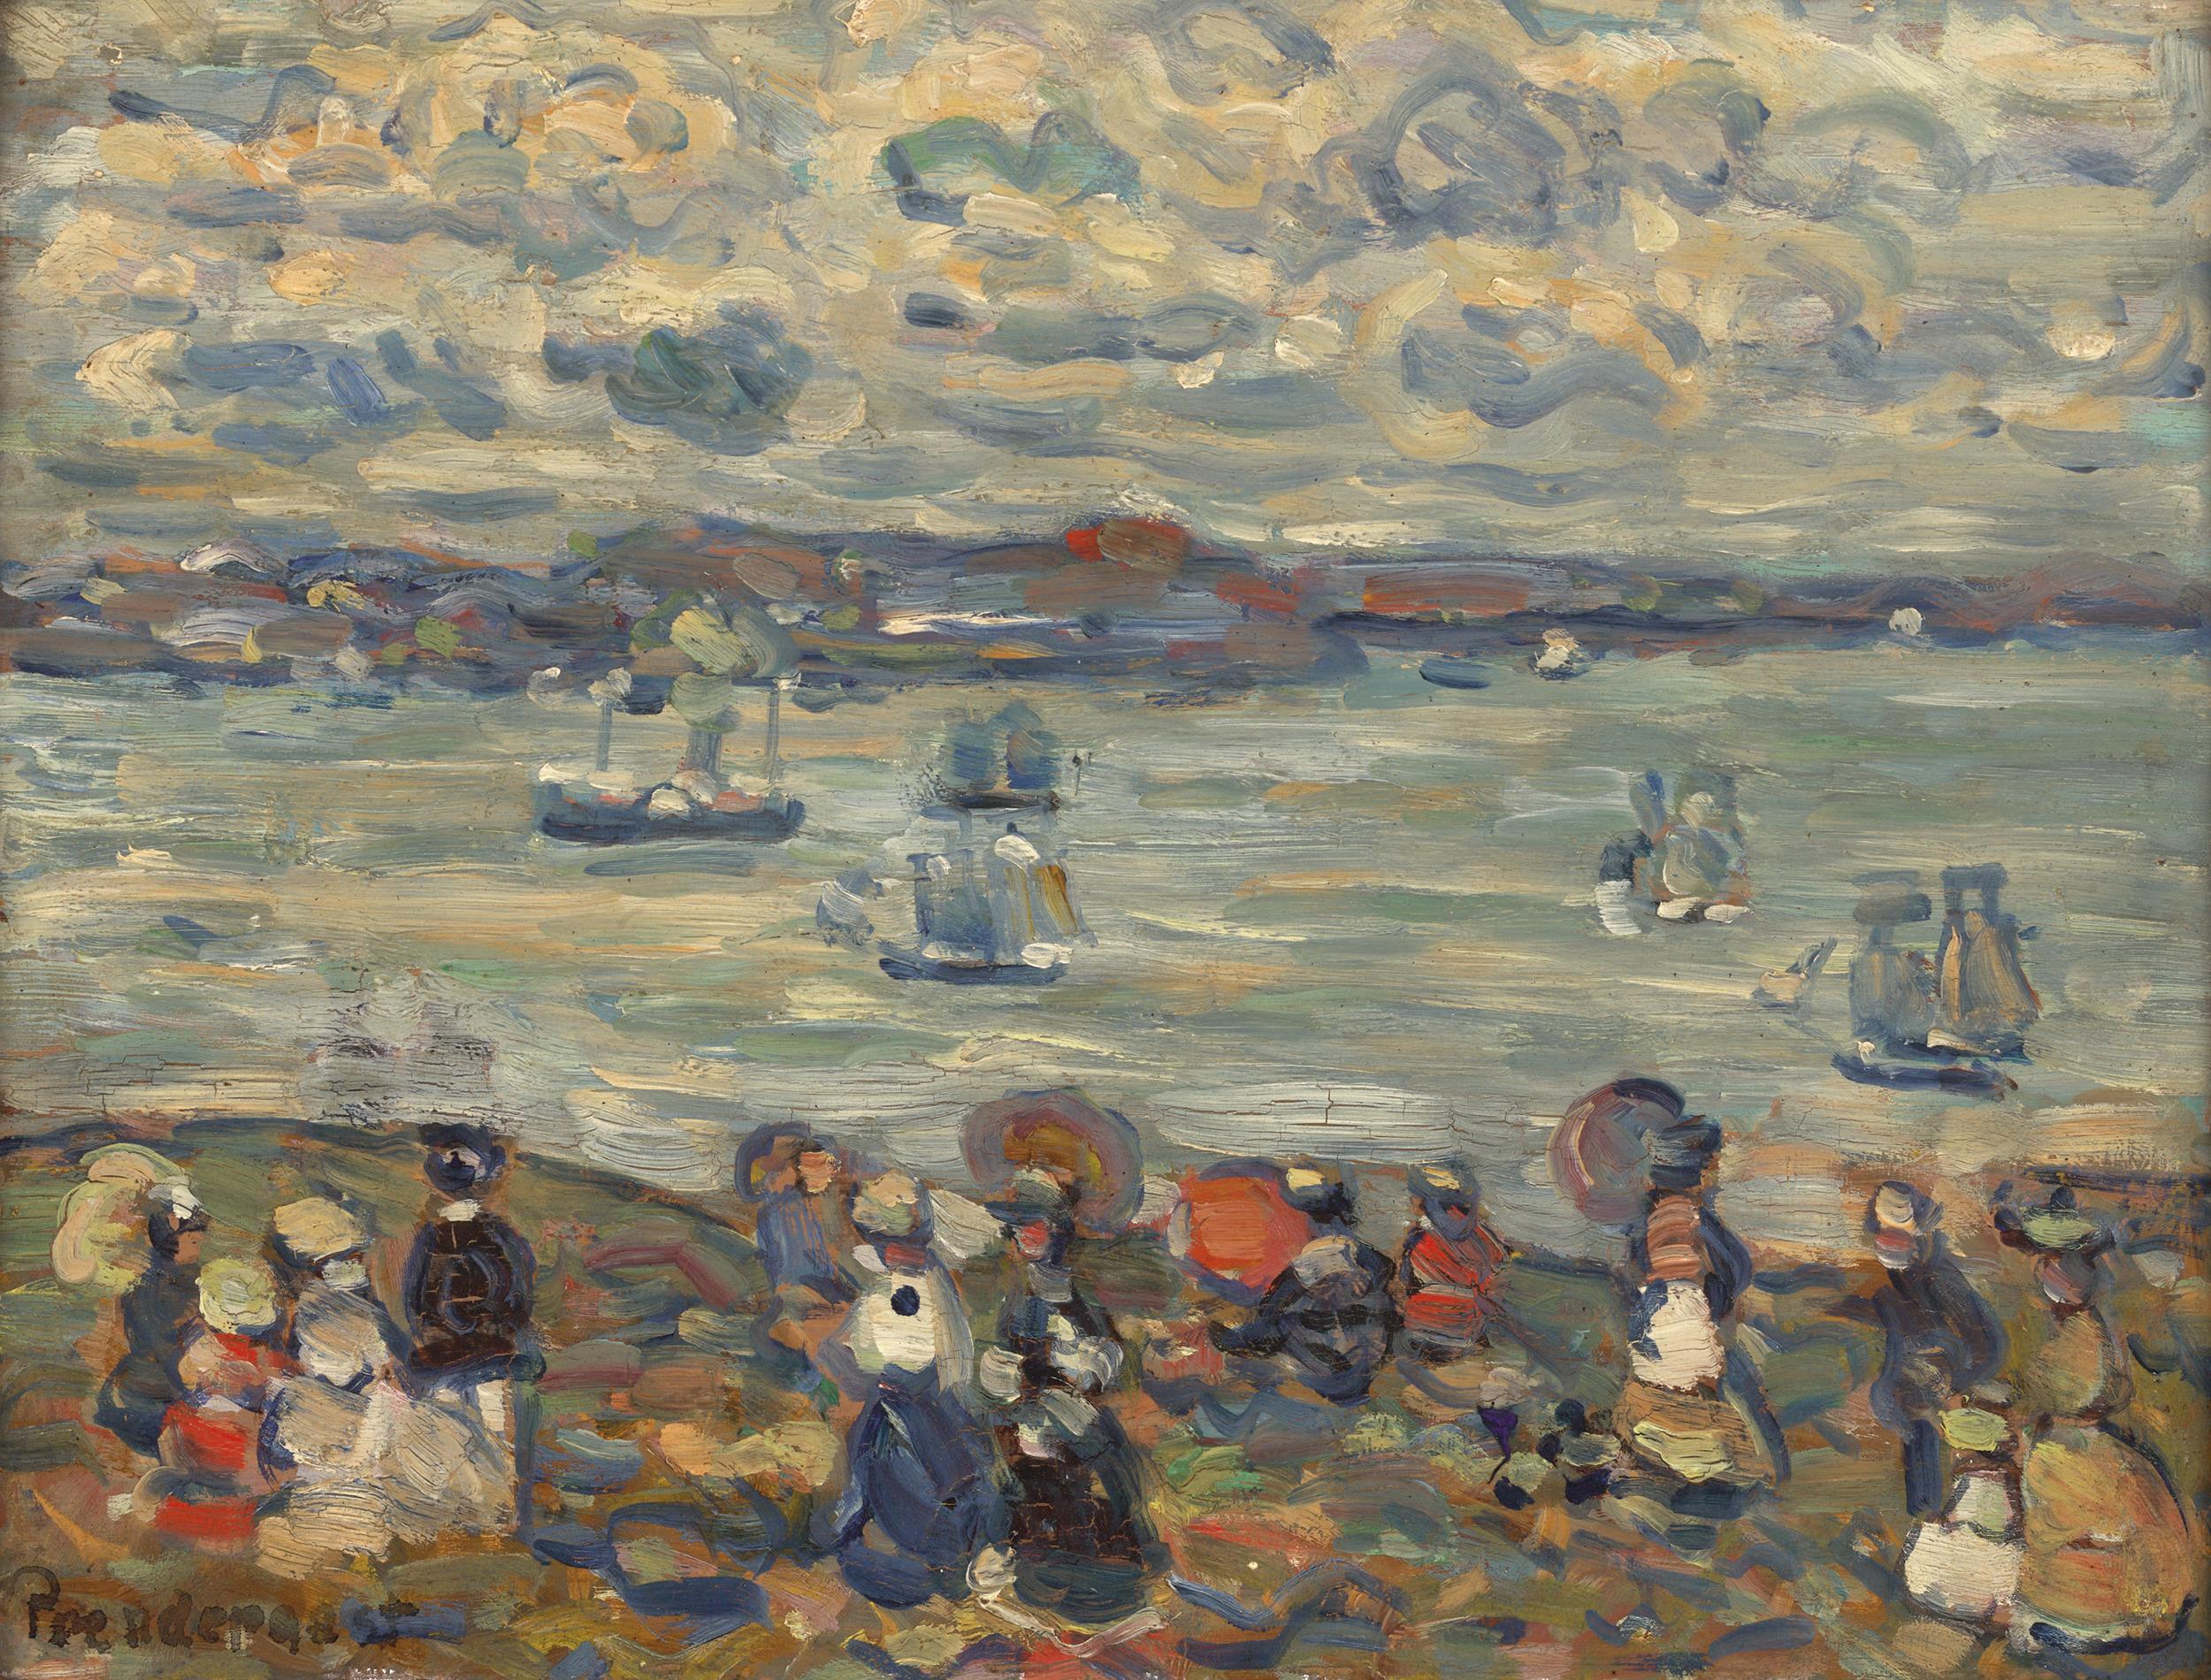 Maurice Brazil Prendergast
1858-1924  American

Beach Scene

Signed "Prendergast" (lower right)
Inscribed "No 13/"Study" St Malo/Maurice Prendergast" (en verso)
Oil on panel

Maurice Brazil Prendergast is regarded among the most significant